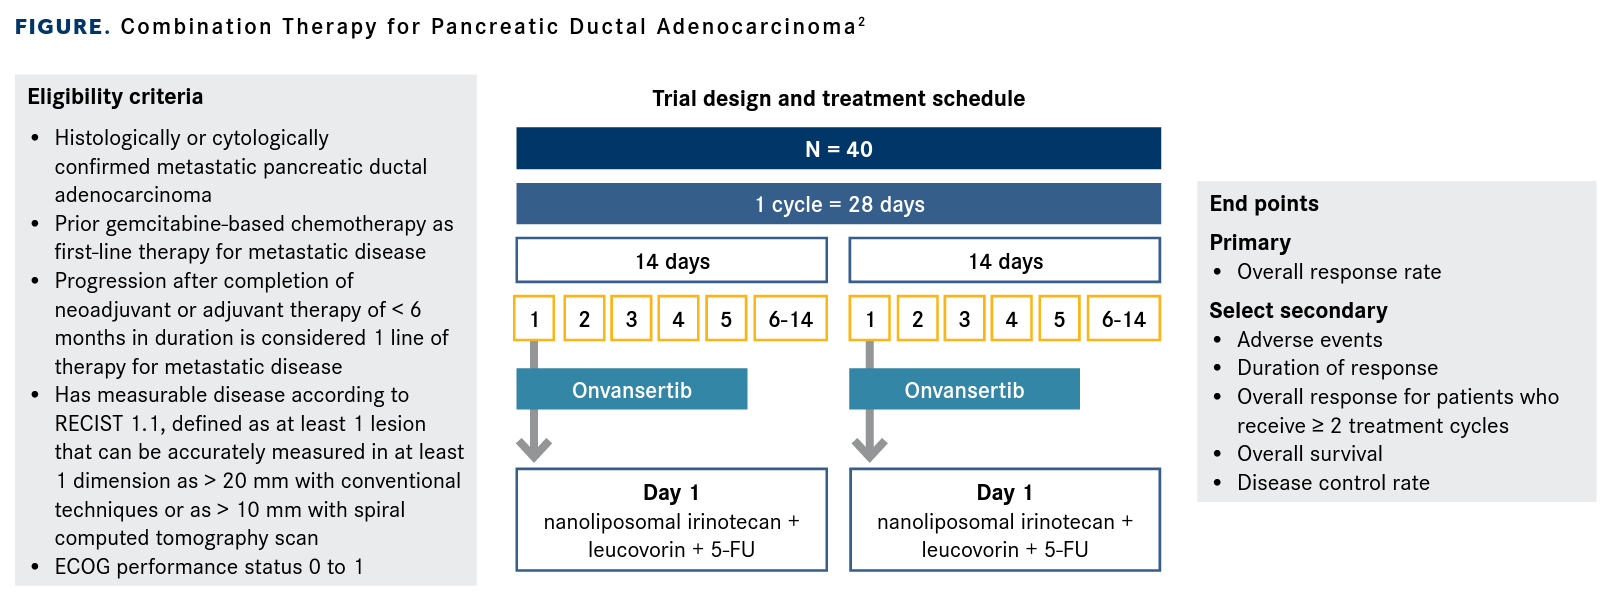 Combination Therapy for Pancreatic Ductal Adenocarcinoma